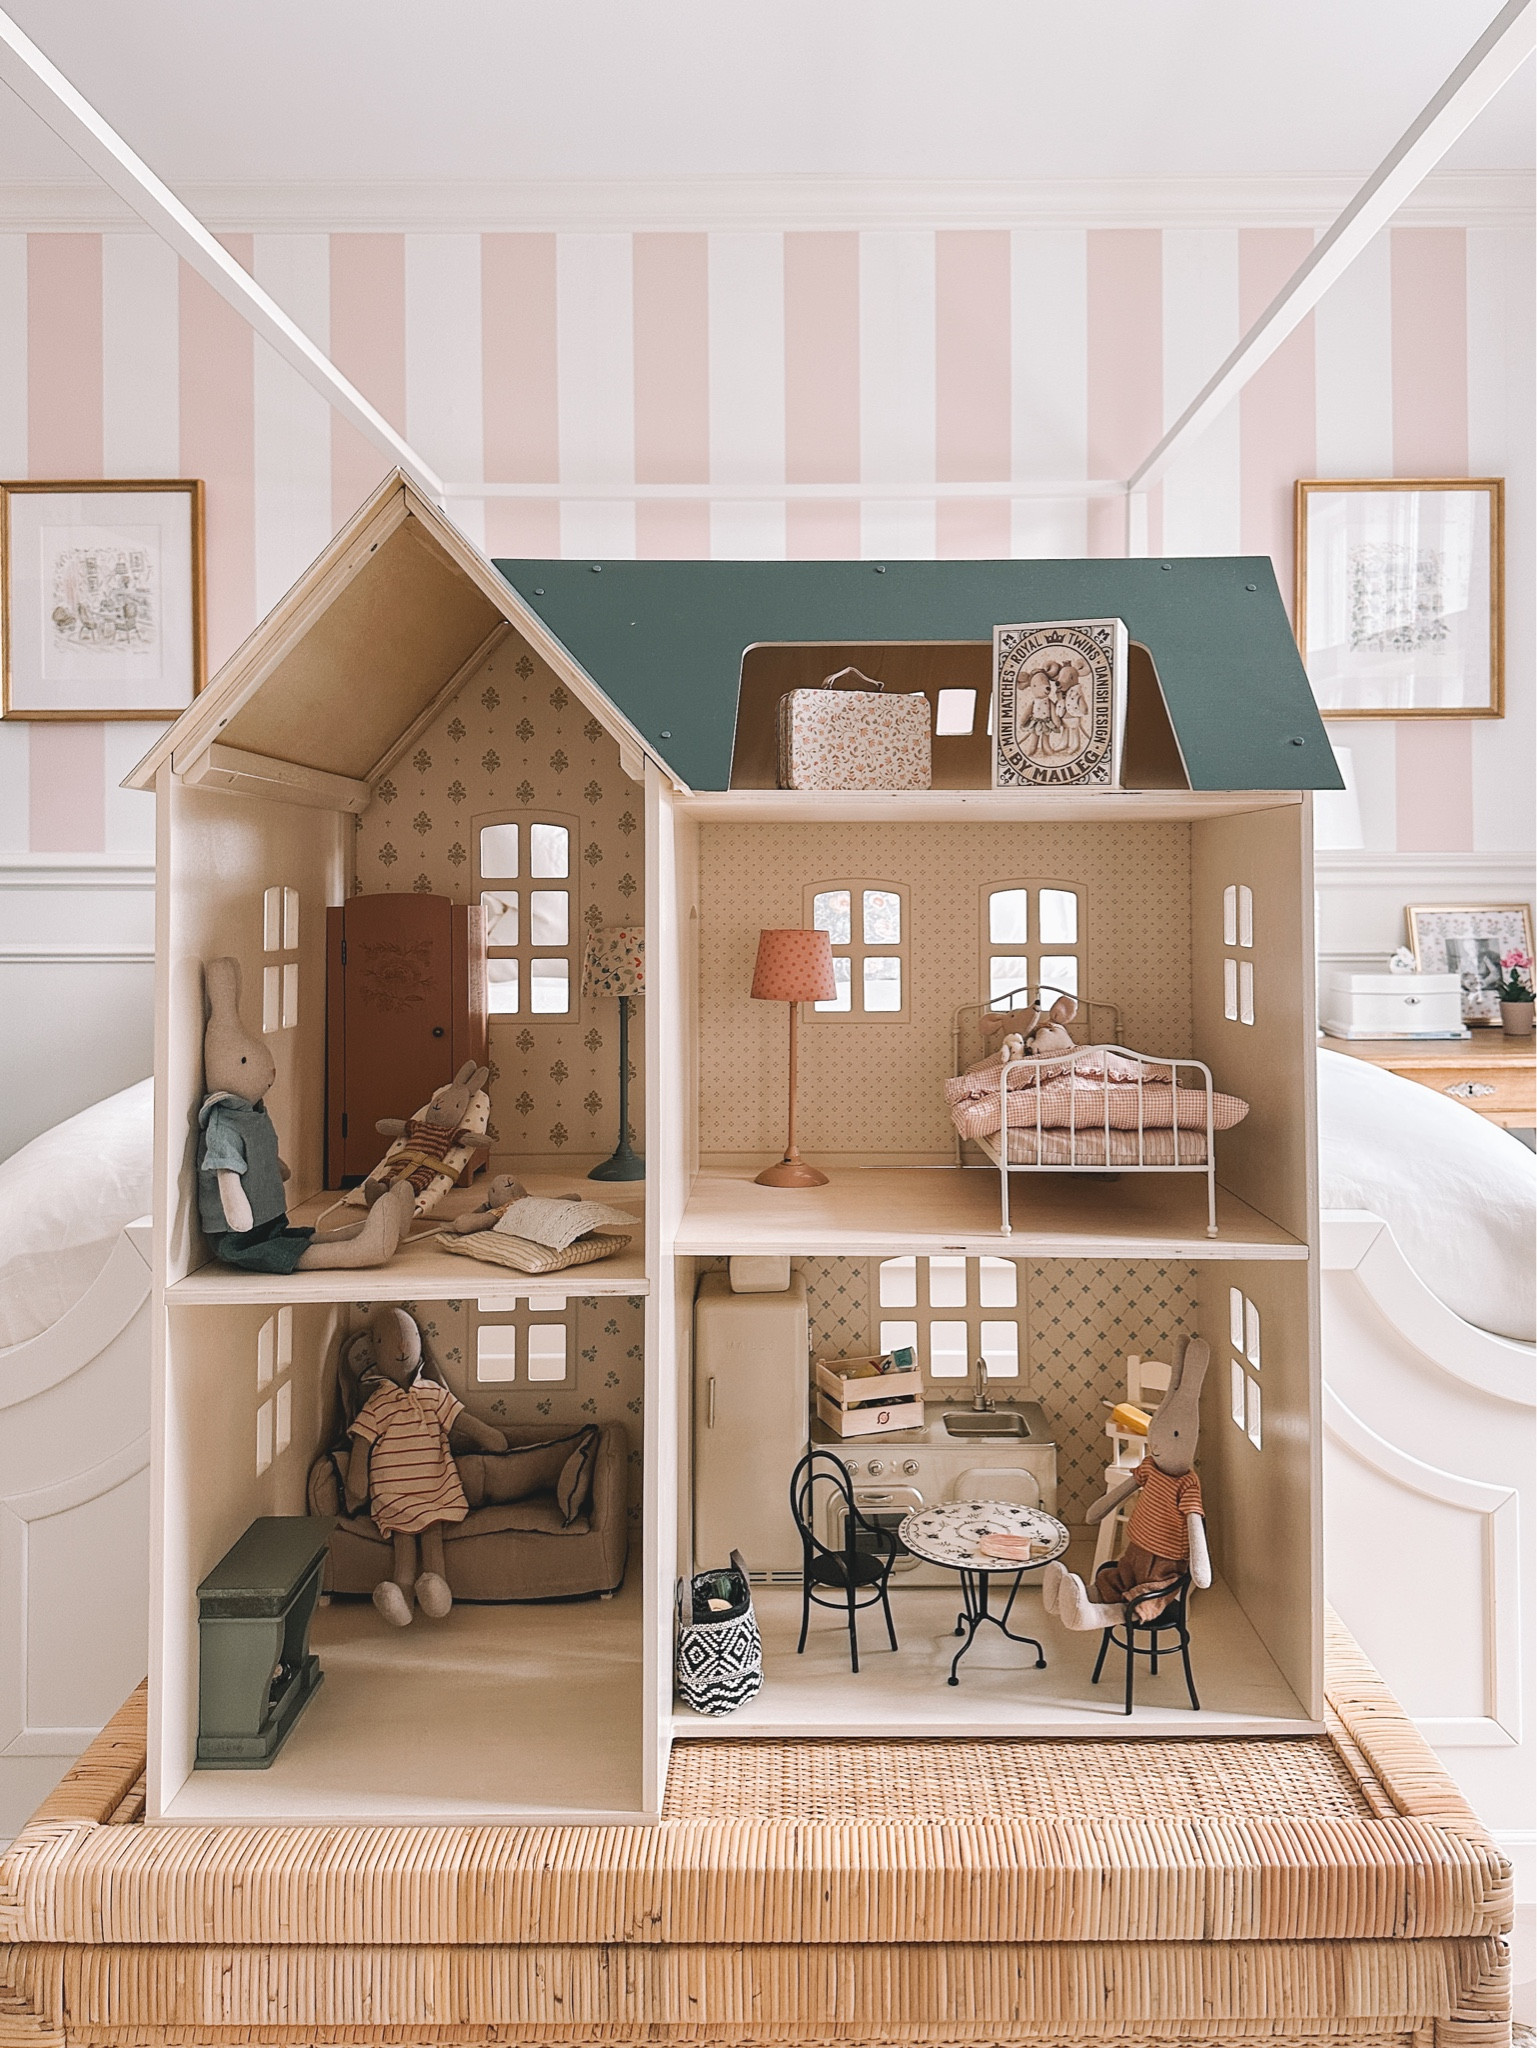 Miniature LTK Dollhouse on - of curated House